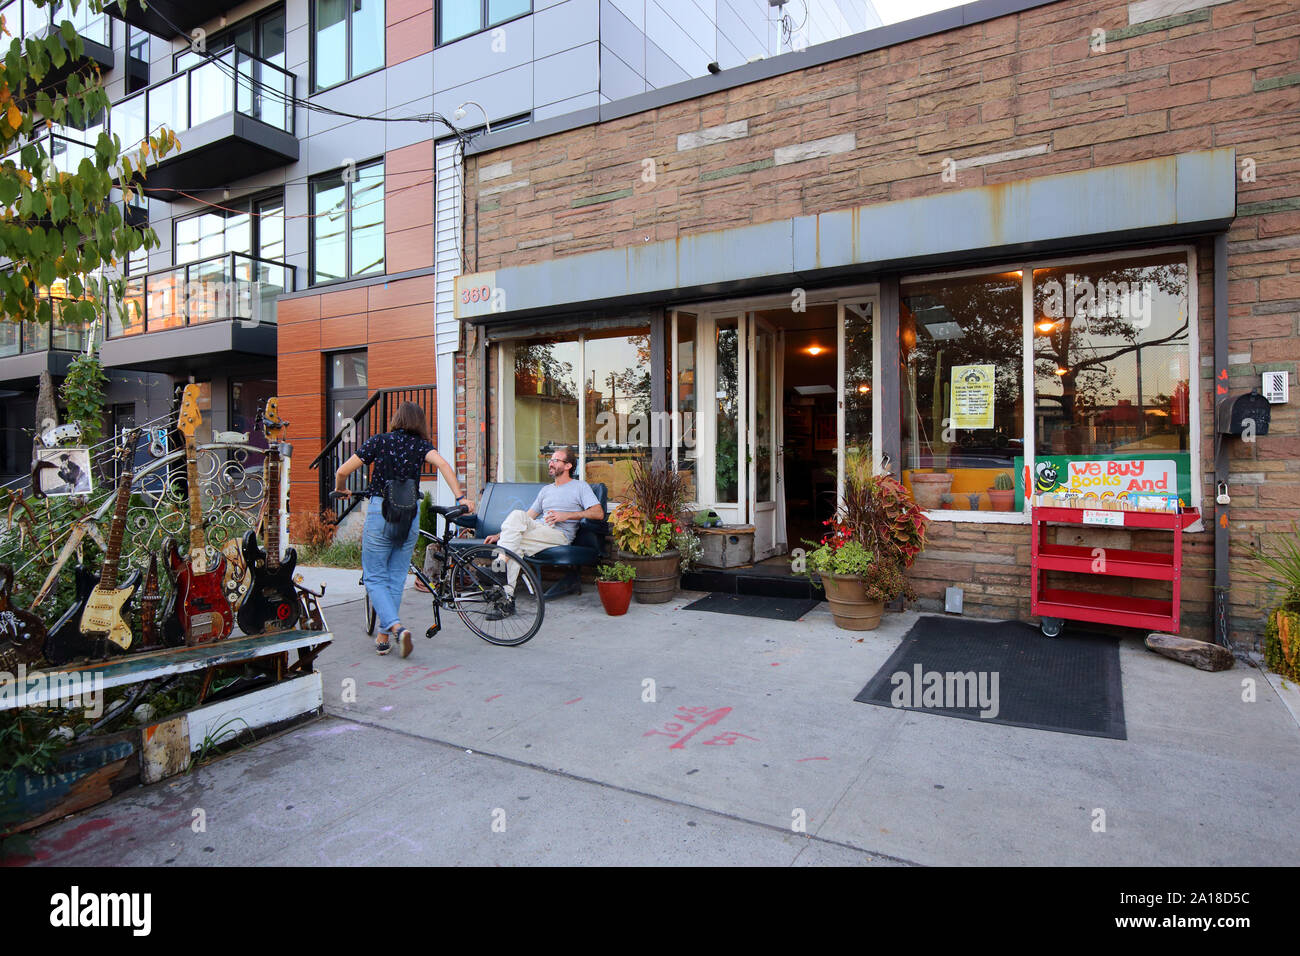 Record Shop, 360 Van Brunt St, Brooklyn, NY. exterior of a record store, and community space in red hook. Stock Photo